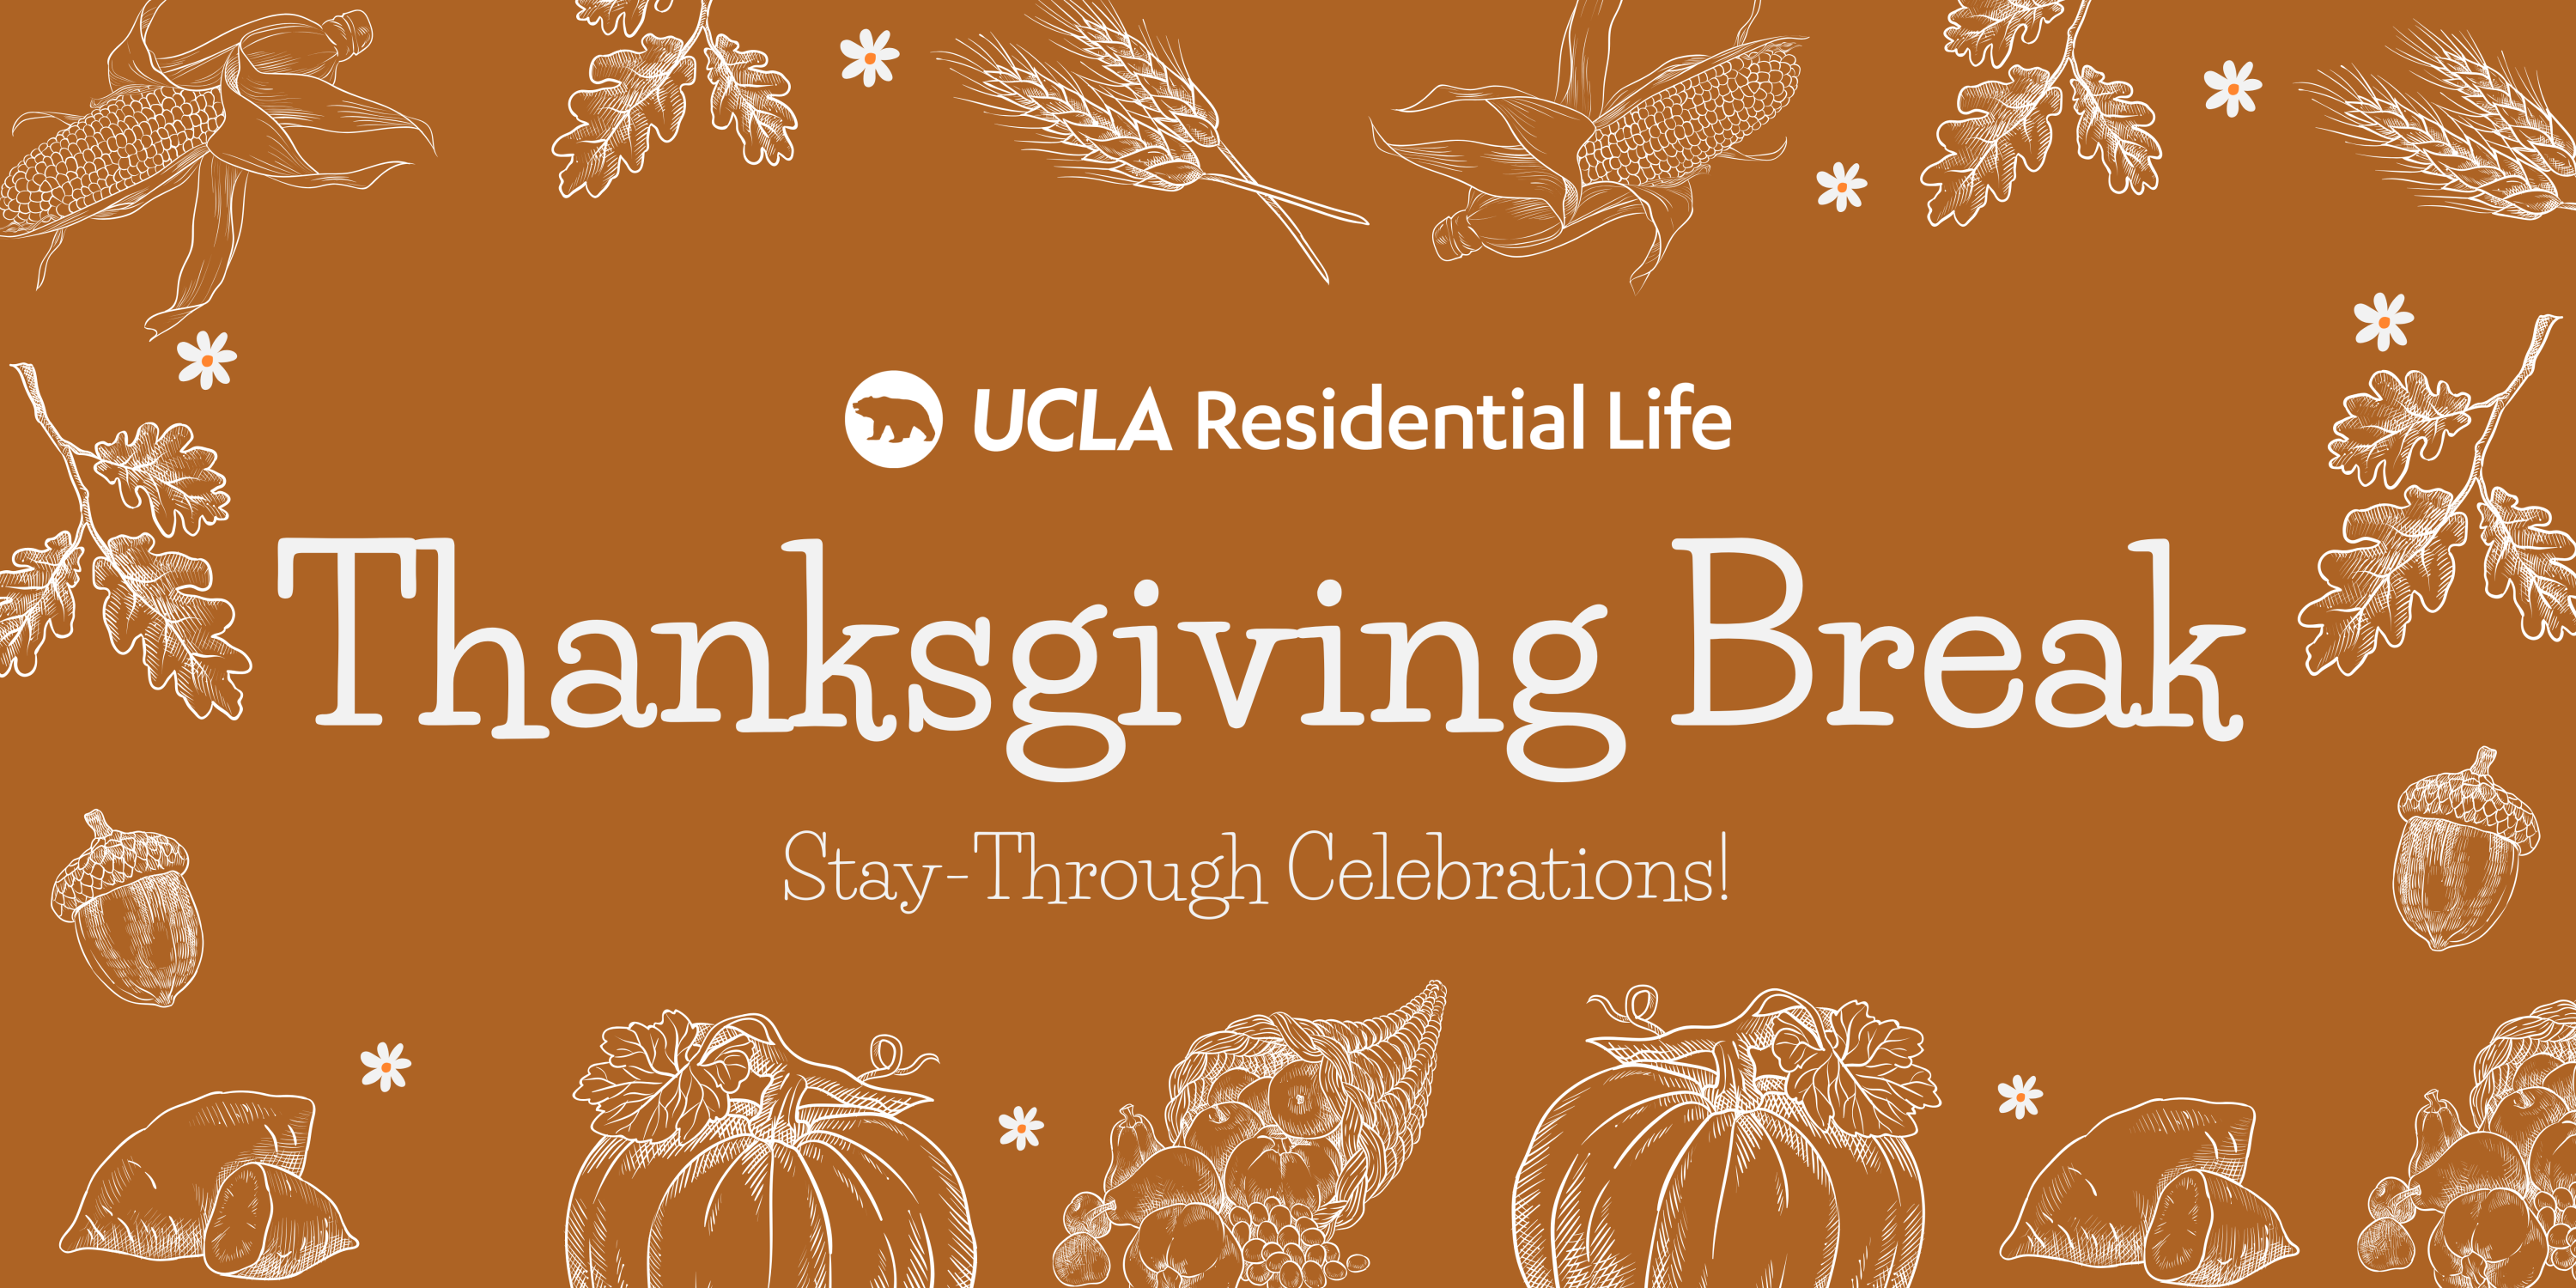 "UCLA Residential Life presents Thanksgiving Break- Stay-Through Celebrations" with Autumn decor